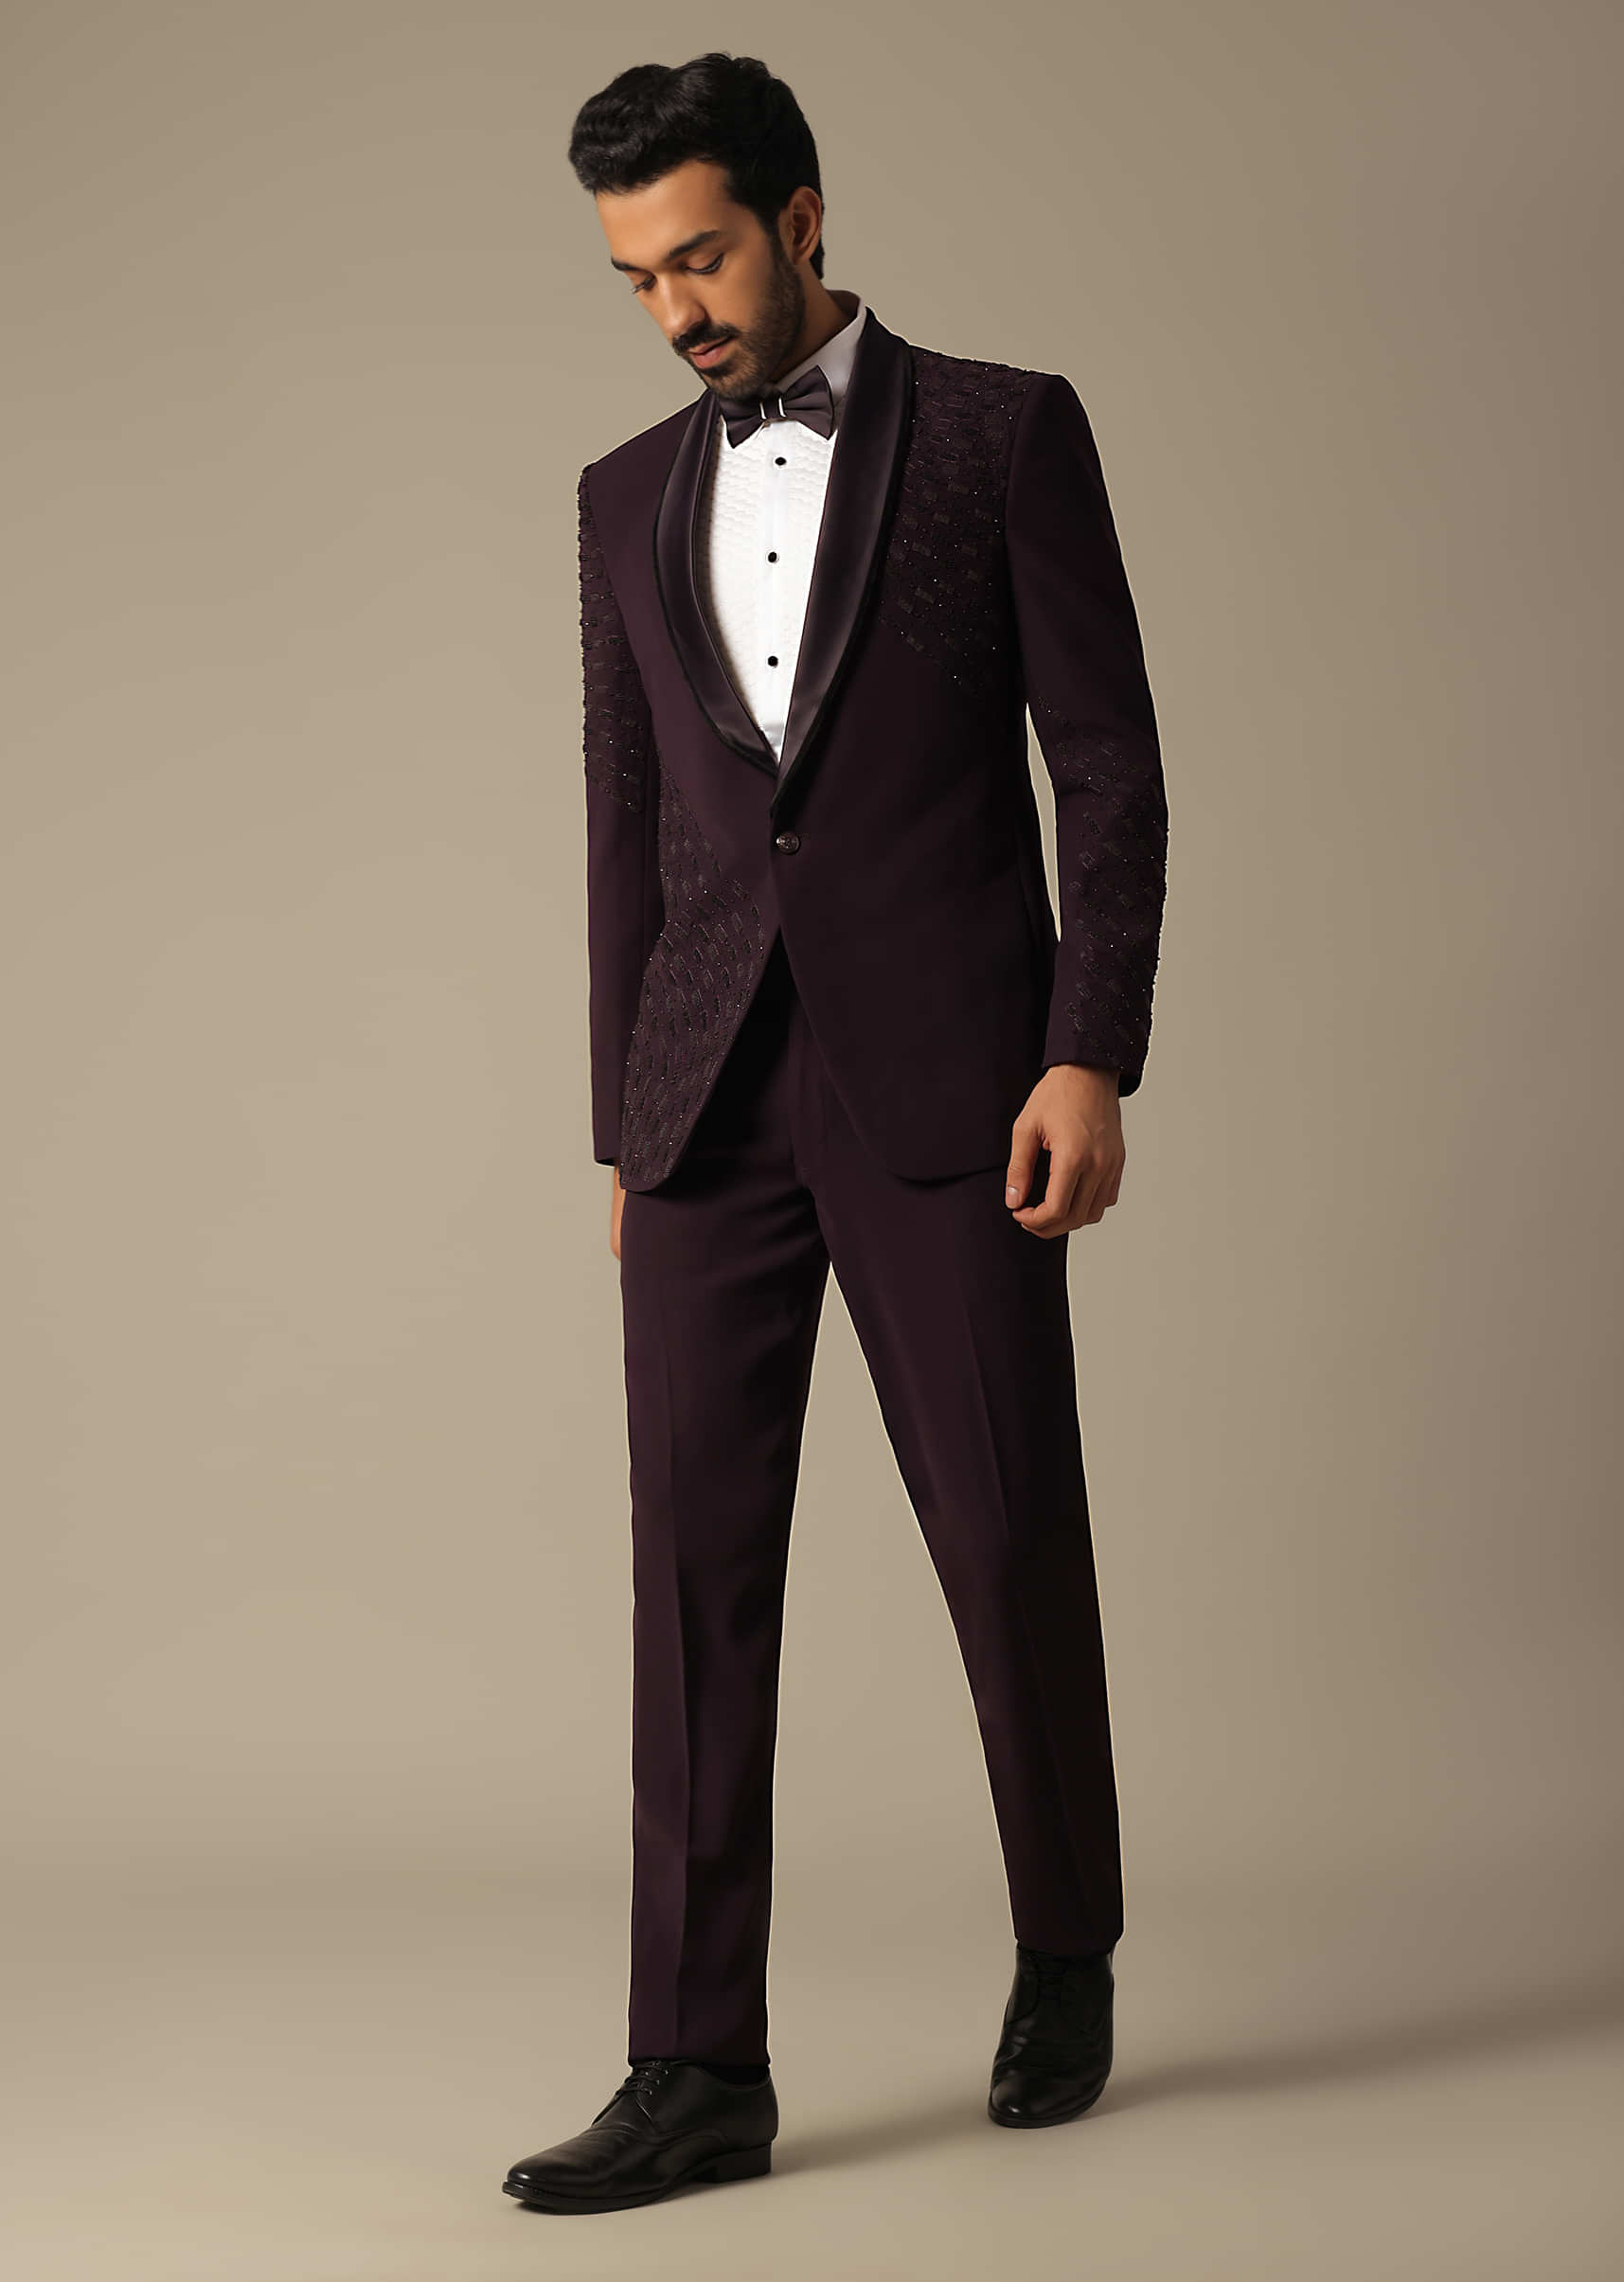 Embroidered Tuxedo Set for the Stylish Groom